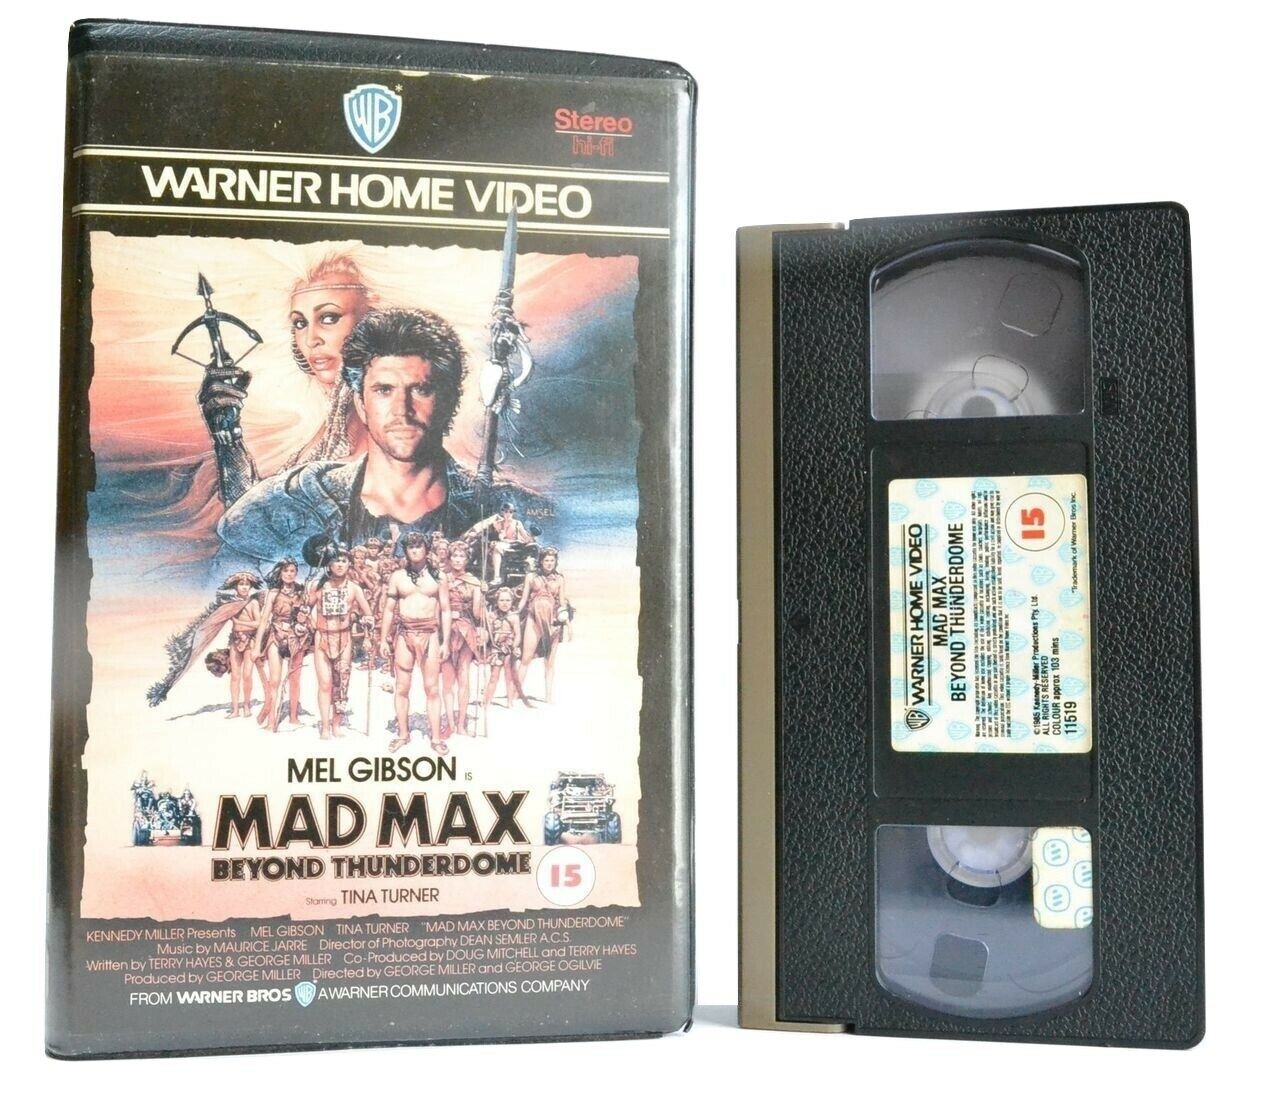 Mad Max: Beyond Thunderdome - (1986) Warner - Post-Apocalyptic - M.Gibson - VHS-